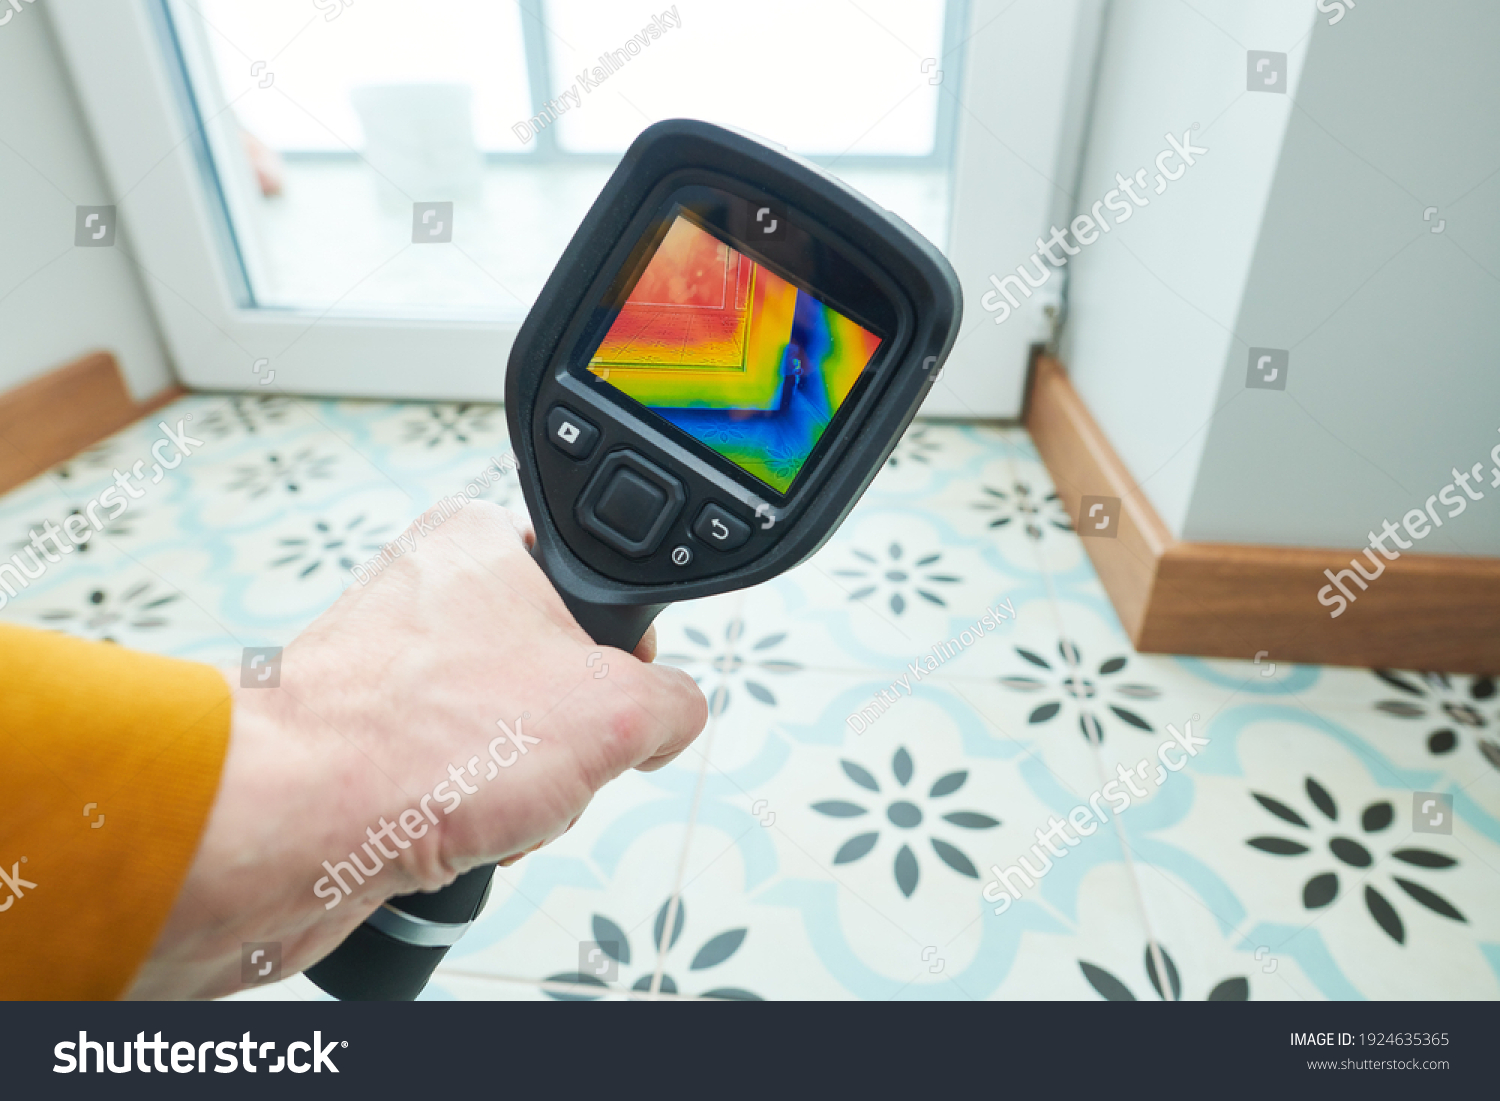 thermal imaging camera inspection of window building. check heat loss #1924635365